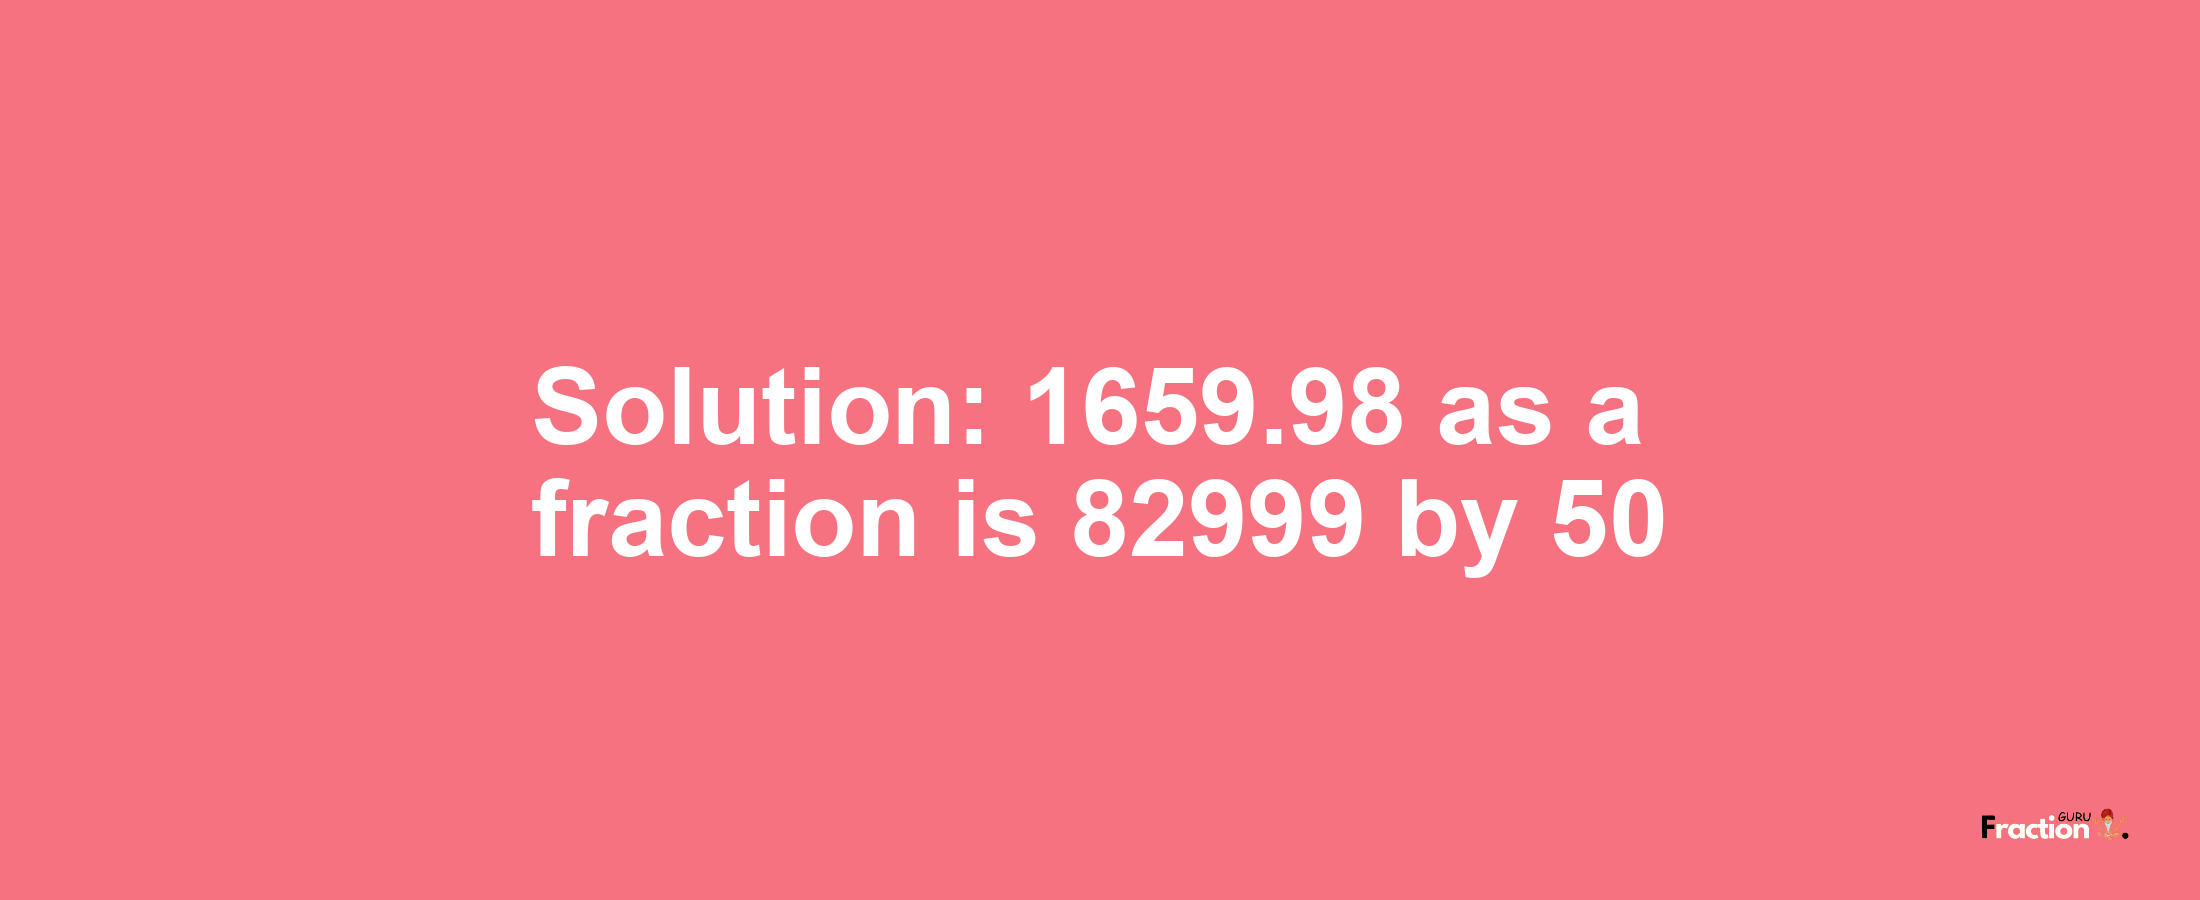 Solution:1659.98 as a fraction is 82999/50